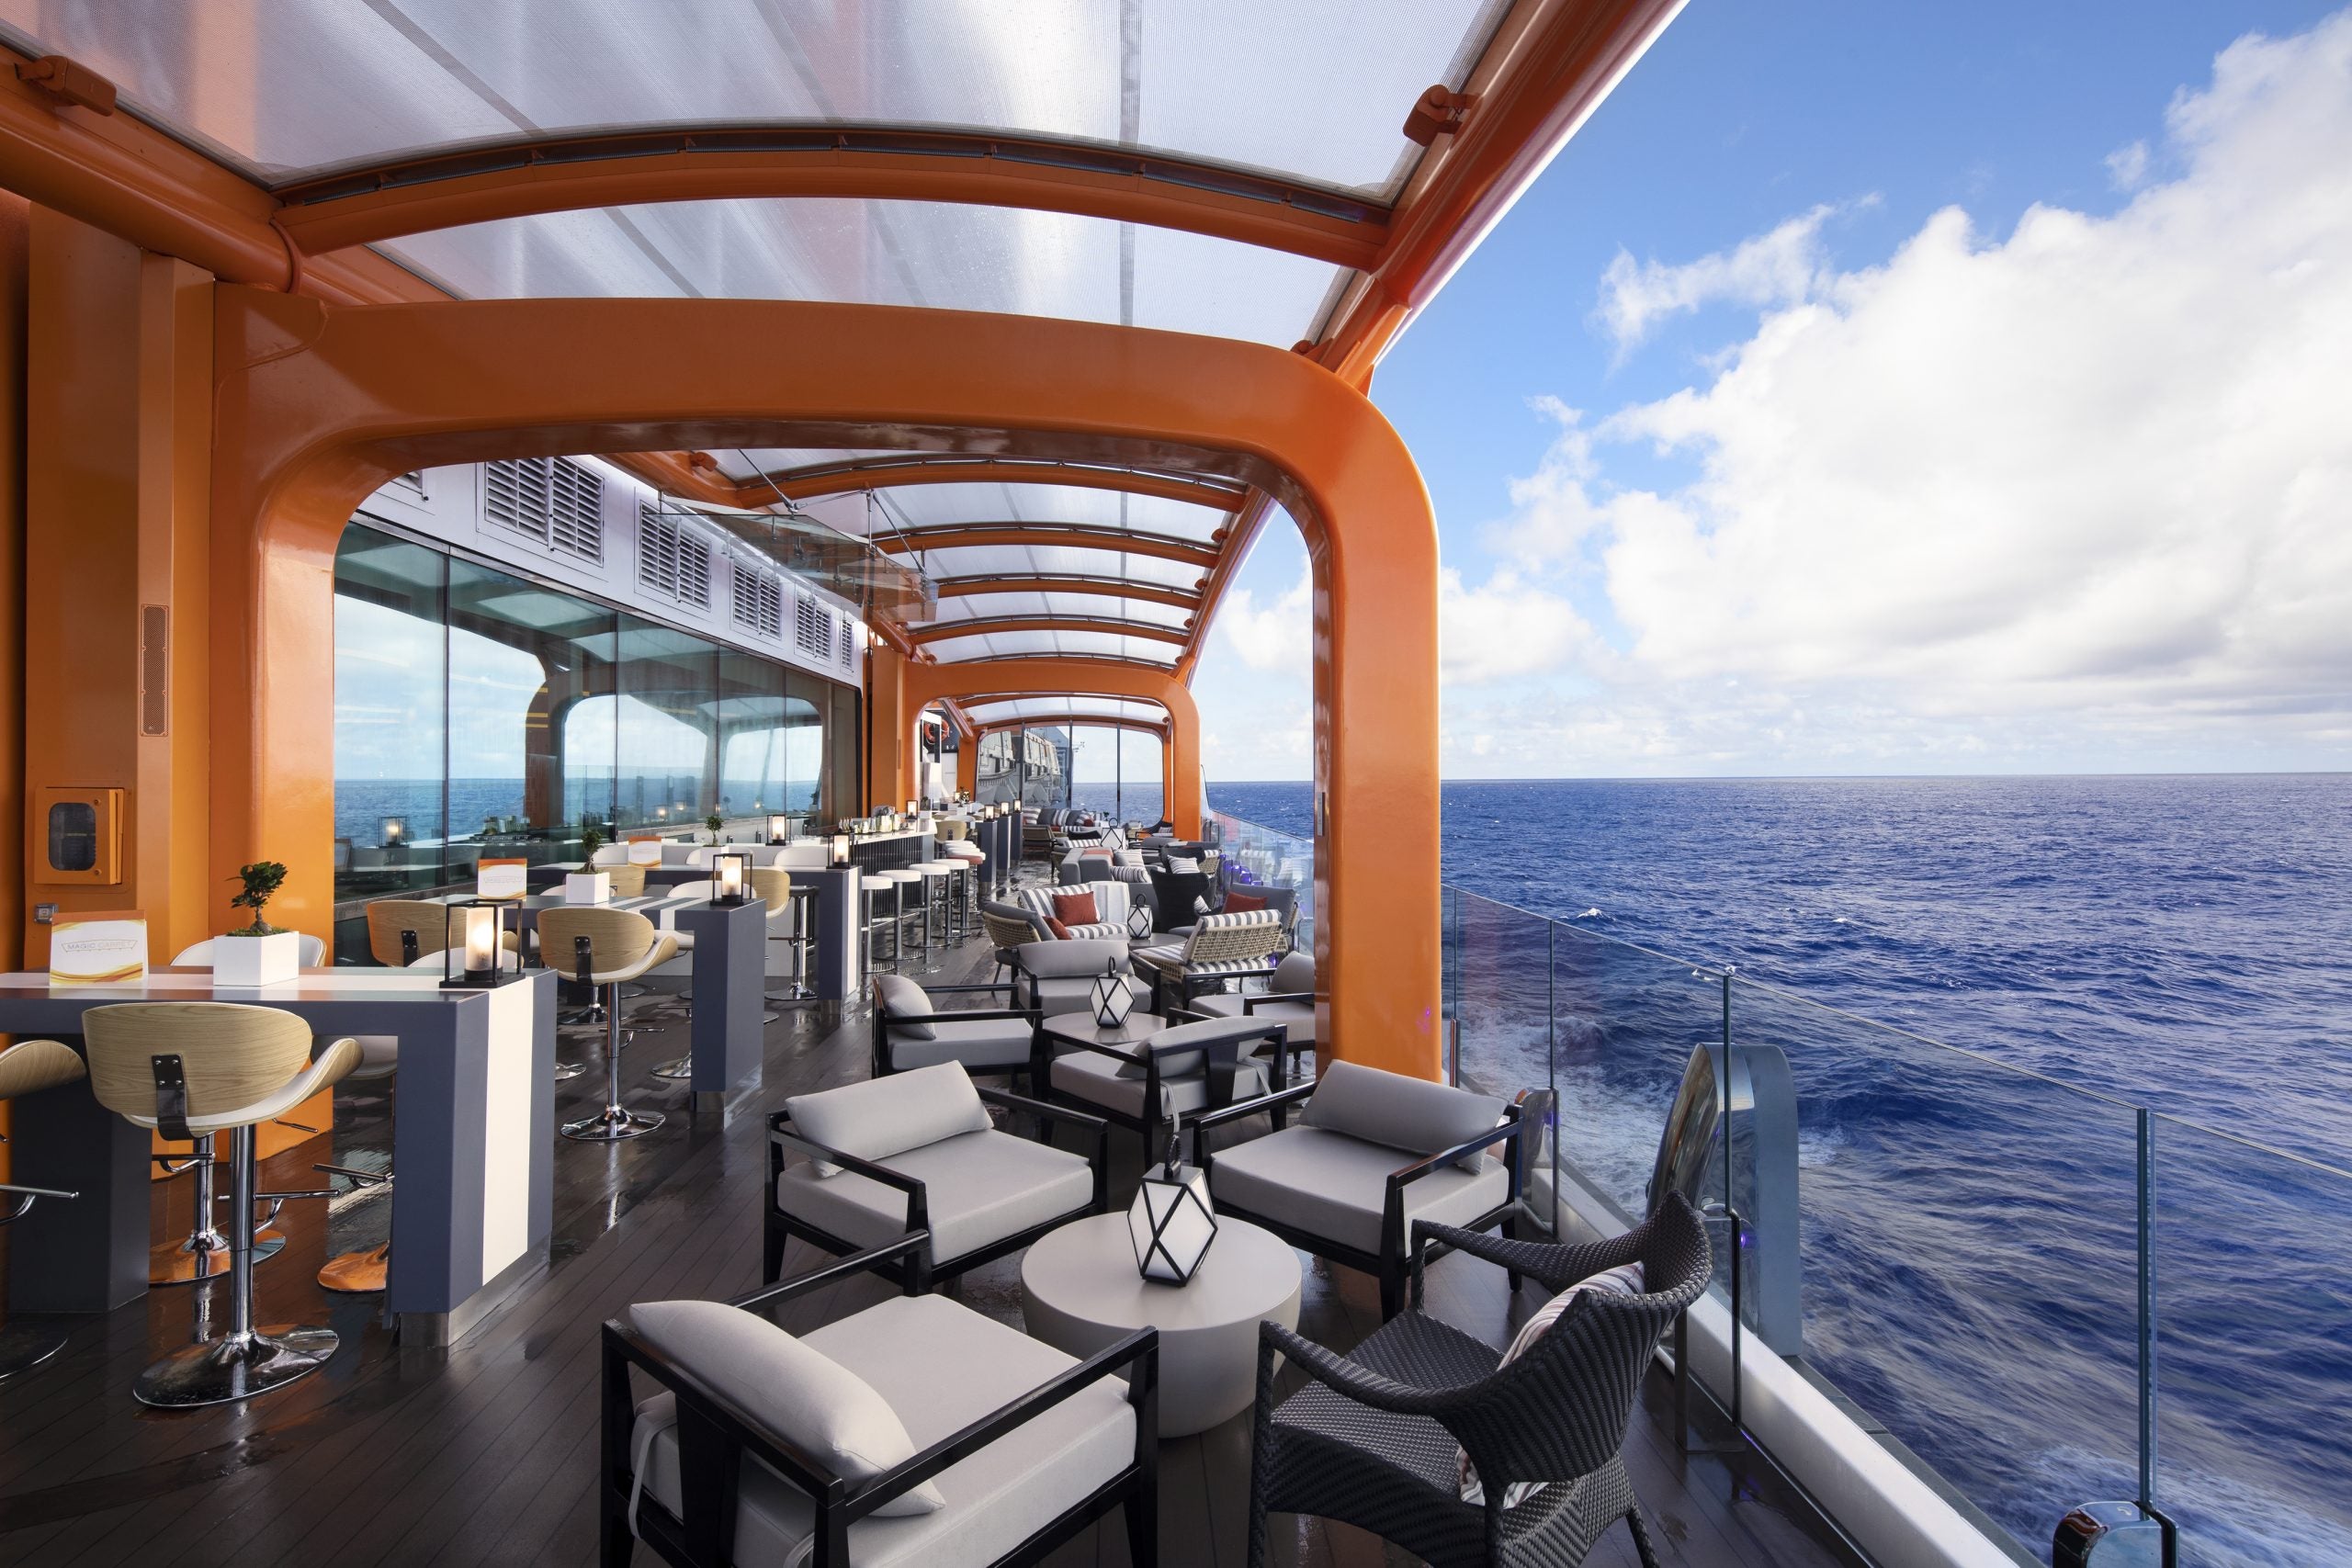 celebrity cruises entertainment and shows